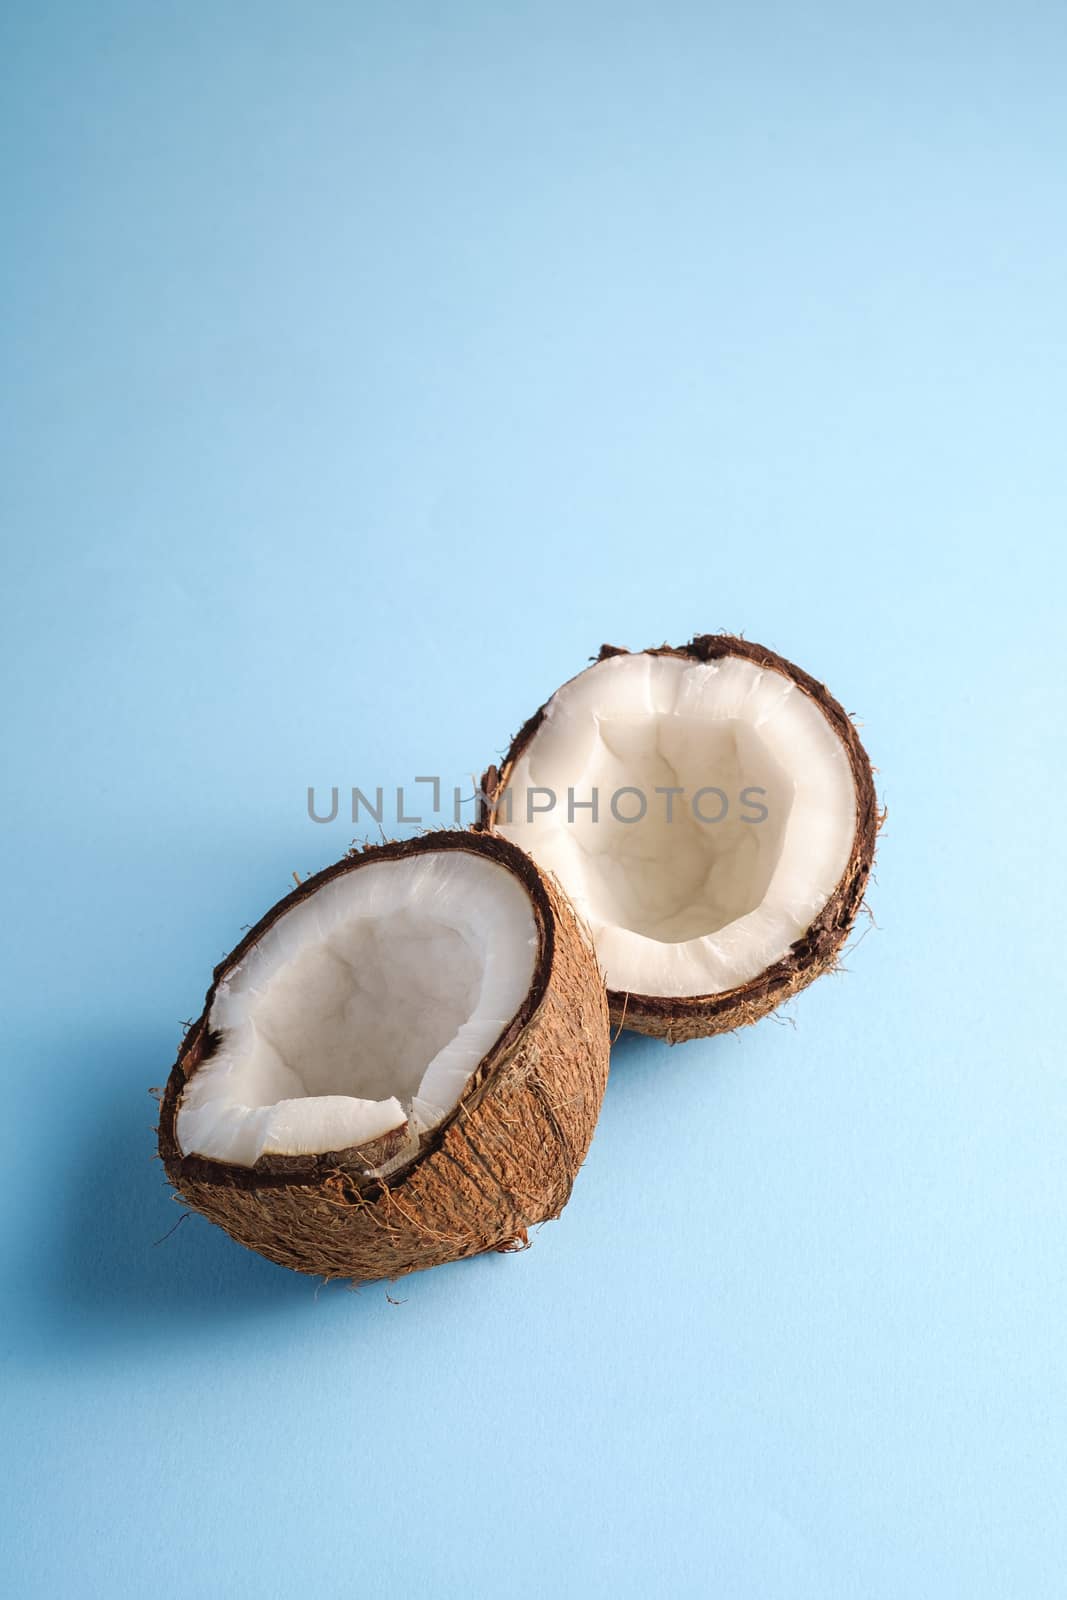 Coconut fruits on blue vibrant plain background, abstract food tropical concept, angle view copy space